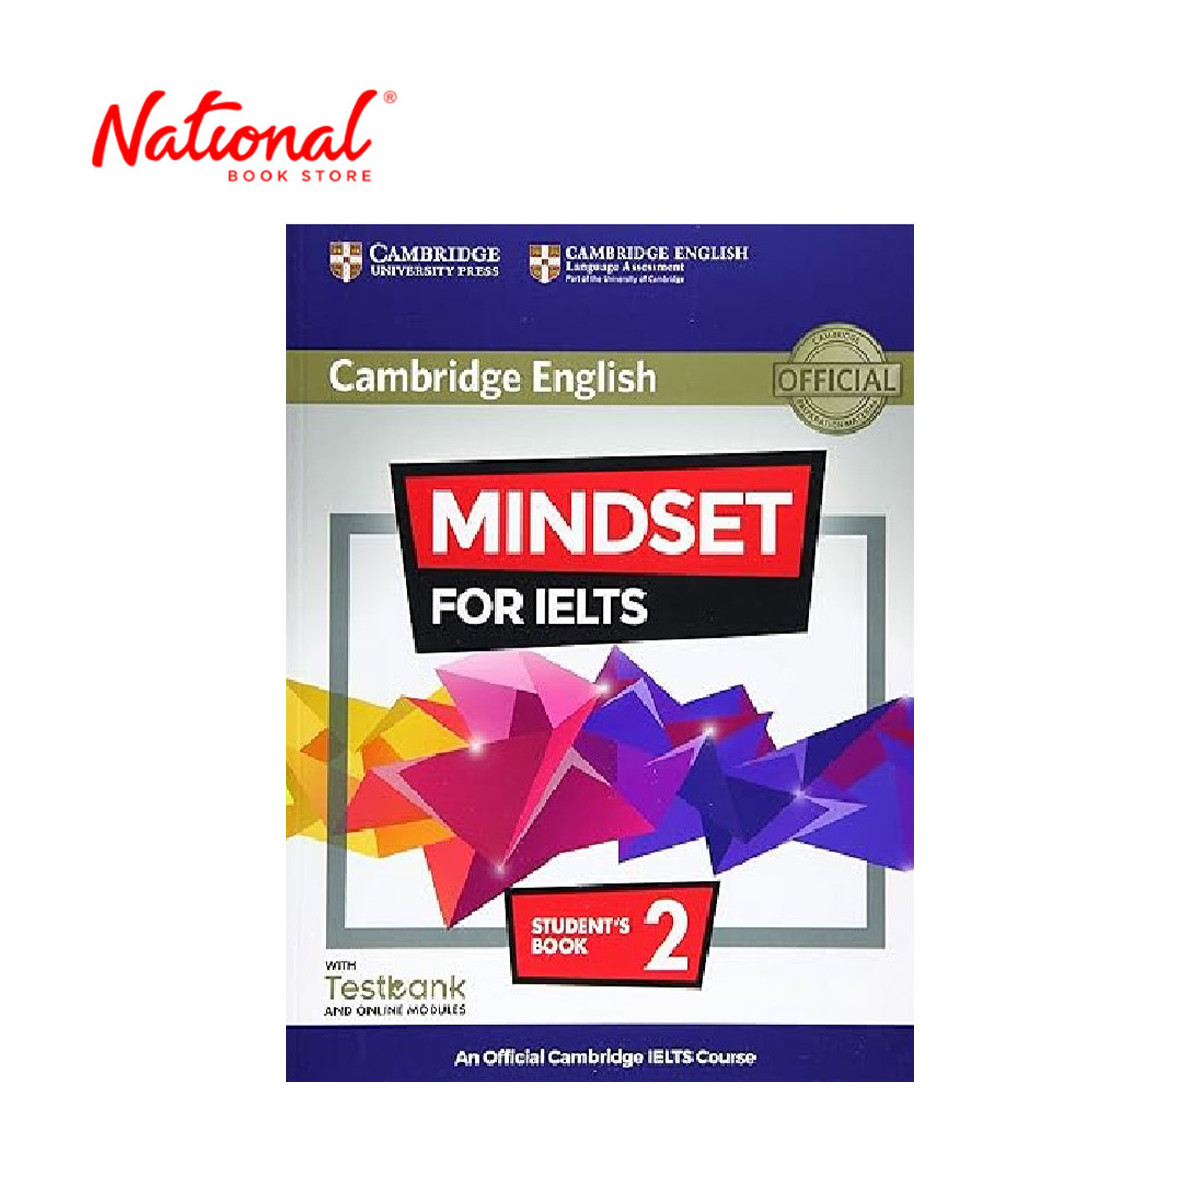 Mindset for IELTS Student's Book 2 by Peter Crosthwaite - Trade Paperback - College Books